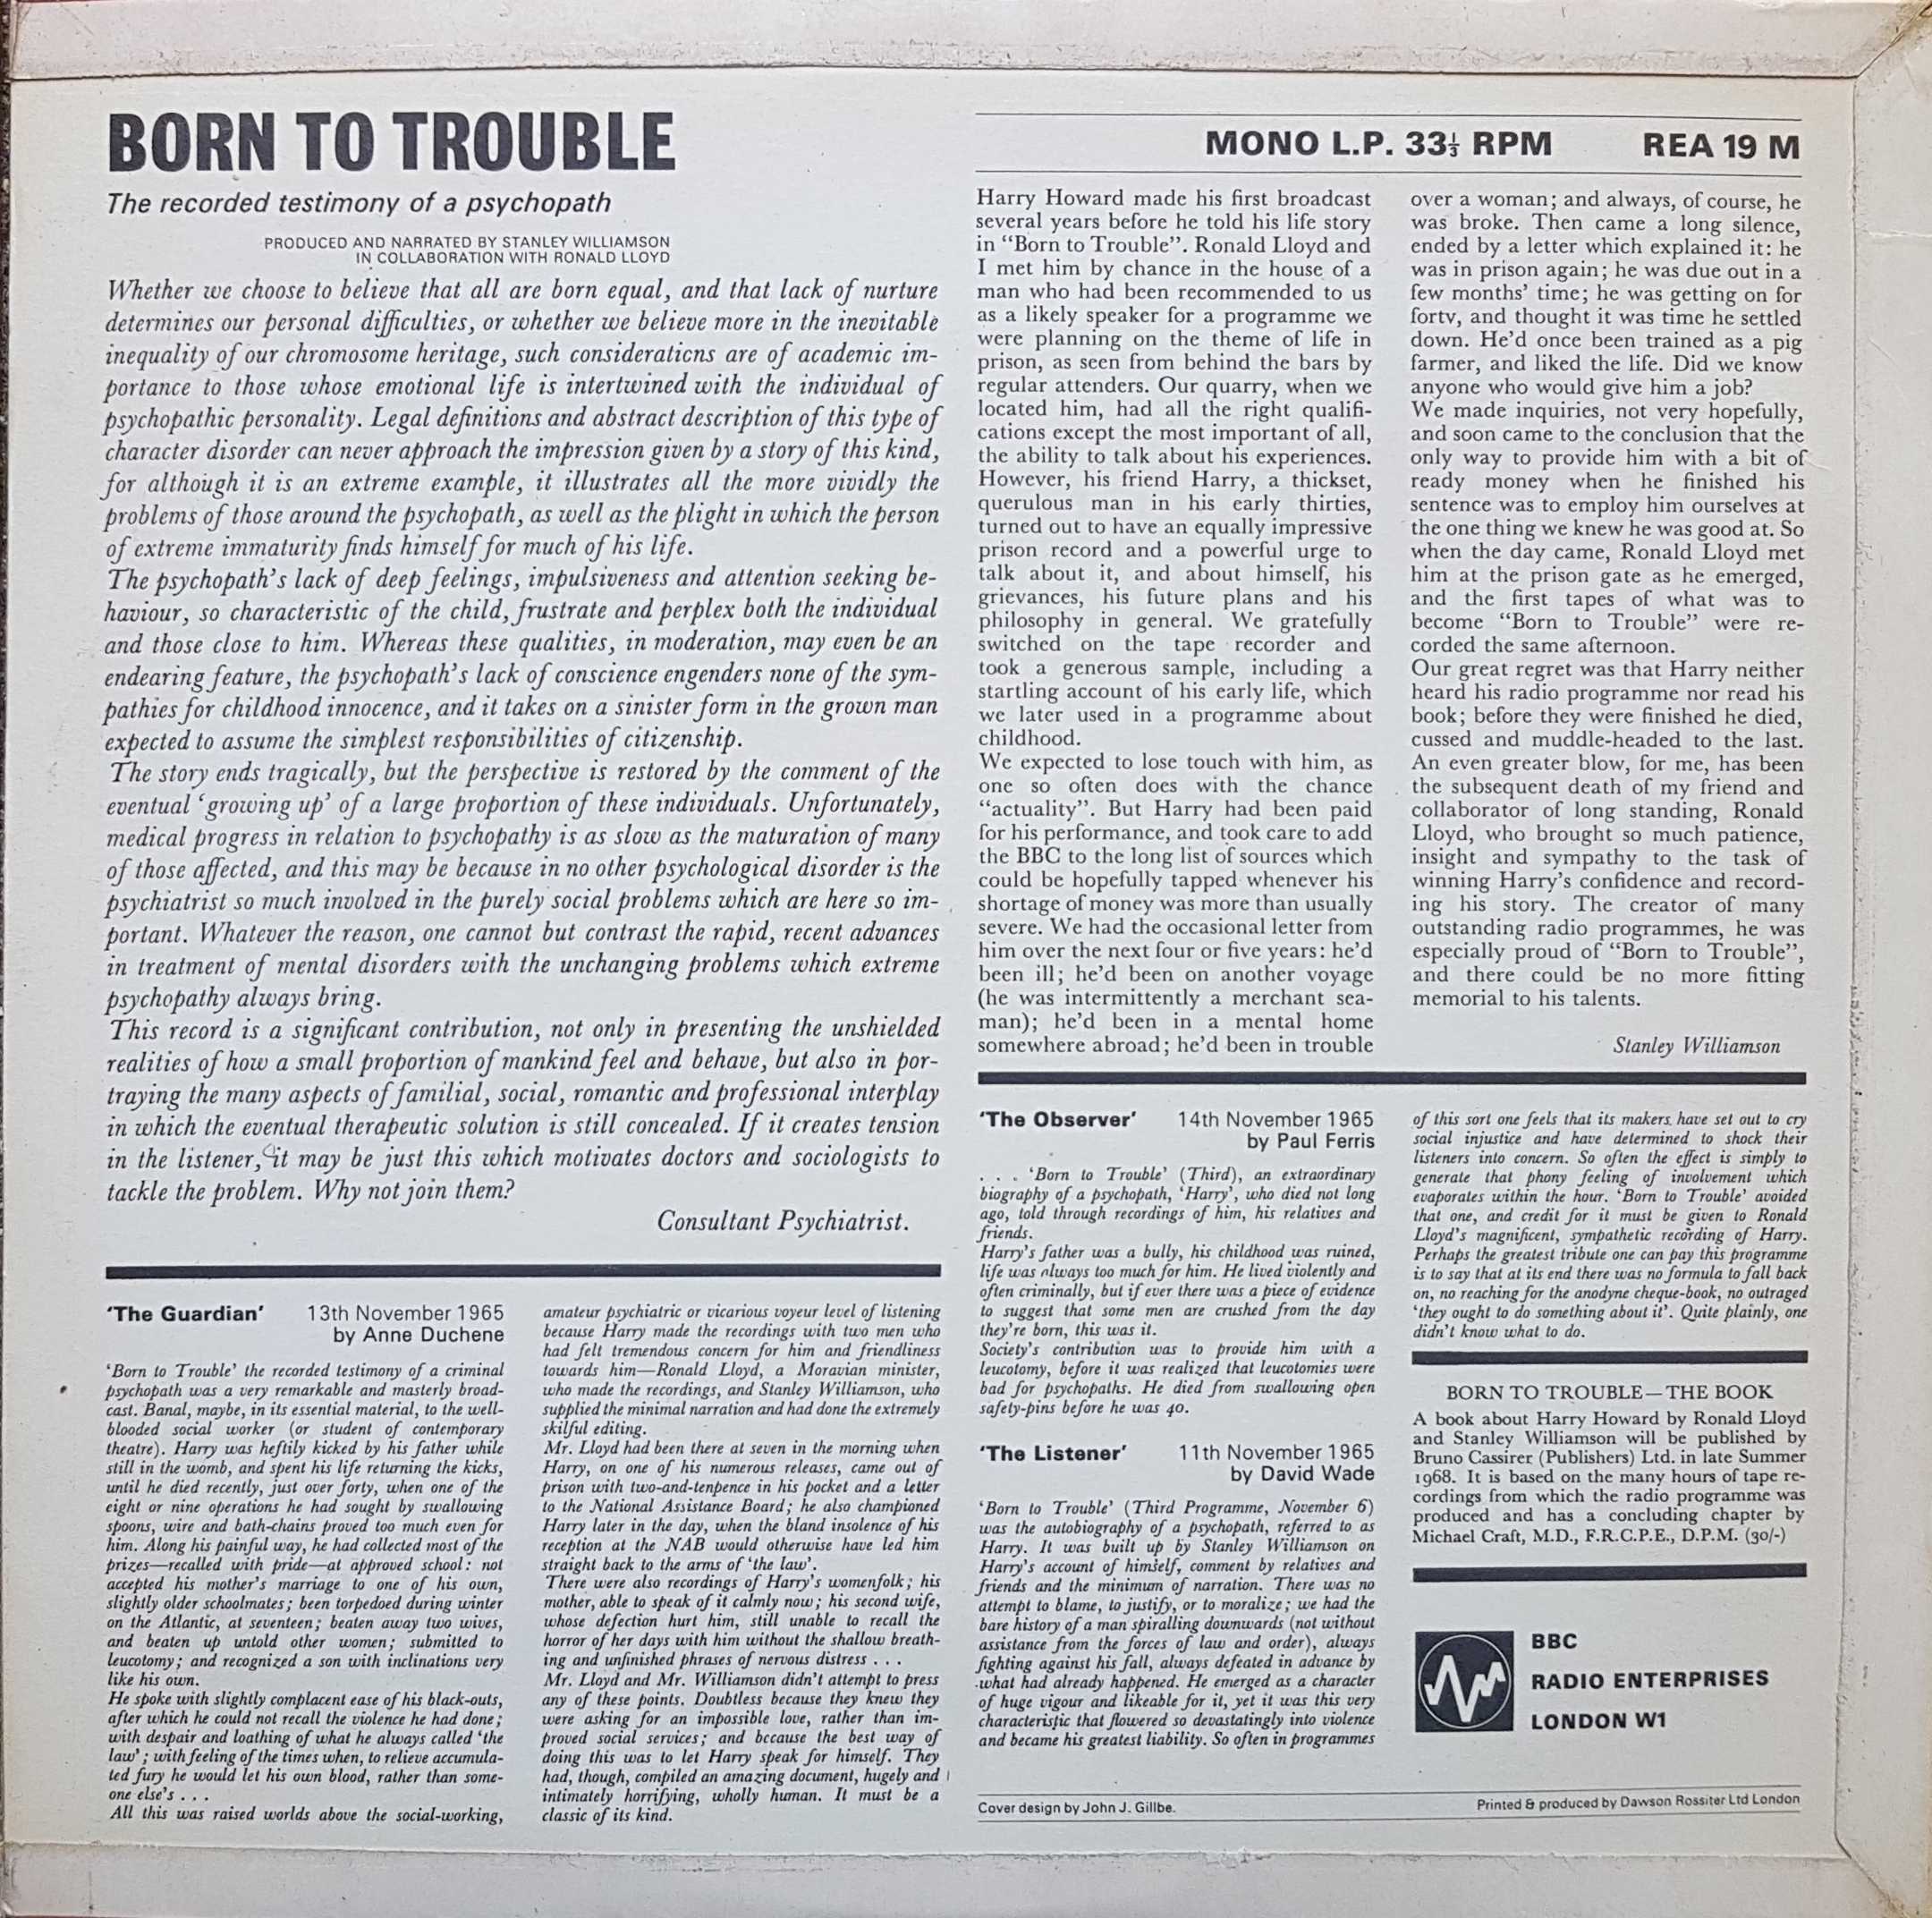 Picture of REA 19 Born to trouble: The recorded testimony of a psychopath by artist Stanley Williamson / Ronald Lloyd from the BBC records and Tapes library